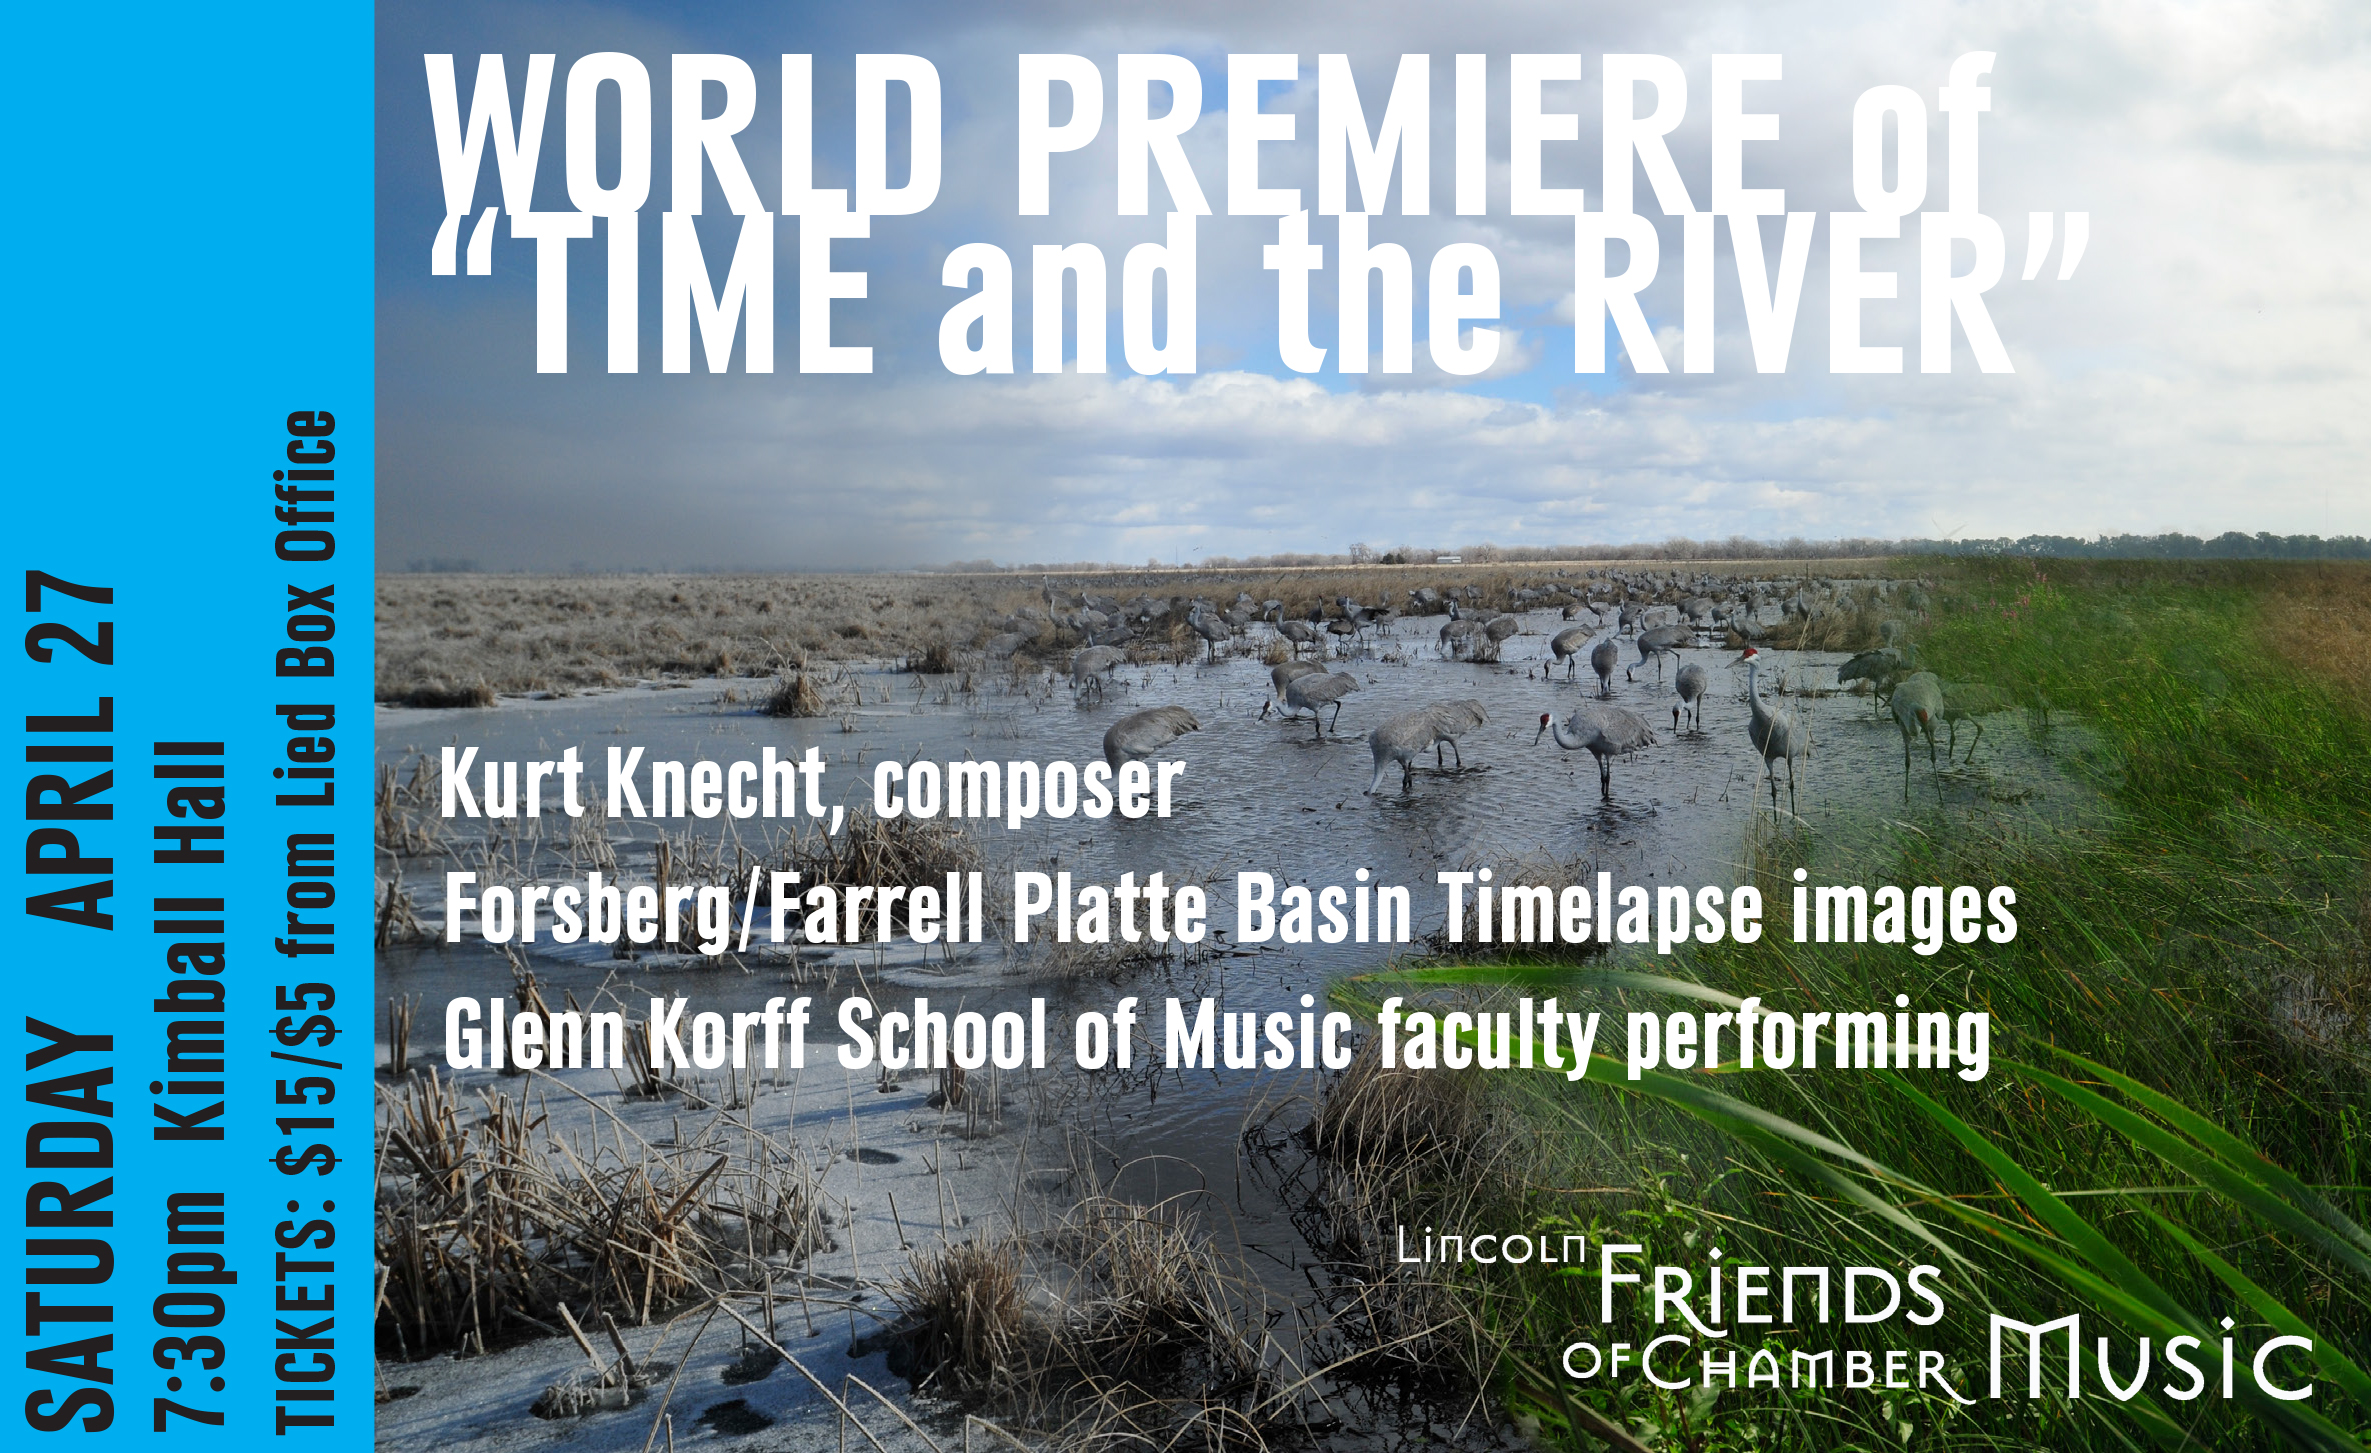 Lincoln Friends of Chamber Music presents the premiere of "Time and the River," featuring a commissioned work by composer Kurt Knecht (D.M.A. 2009) and incoporating visual images from the Platte Basin Timelapse project.